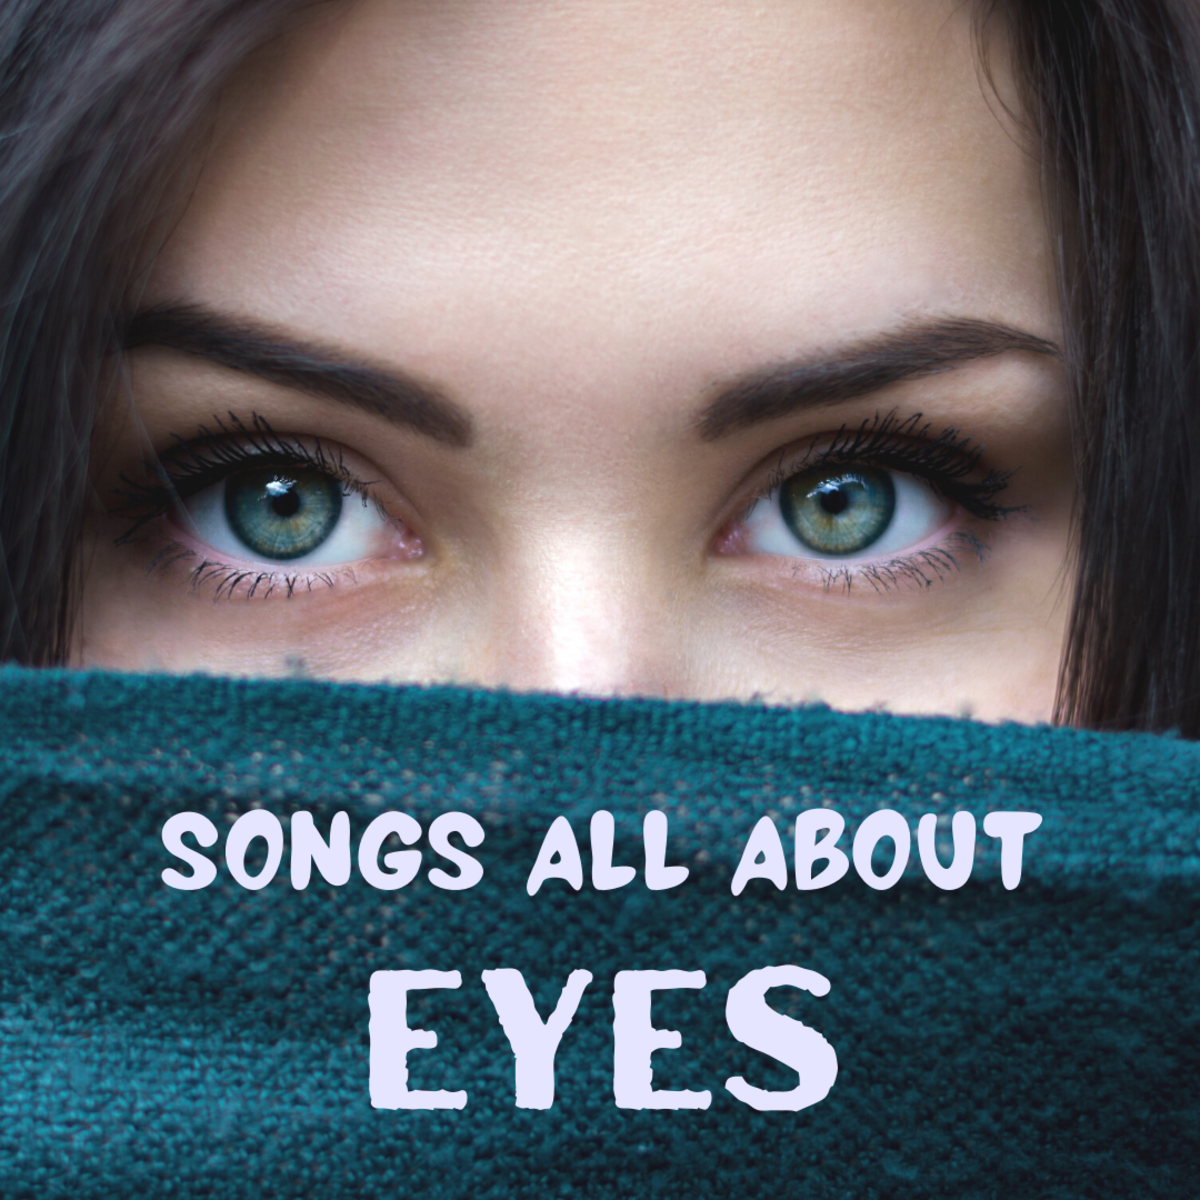 Is seeing really believing? Find out by listening to these songs with "eyes" in the title.